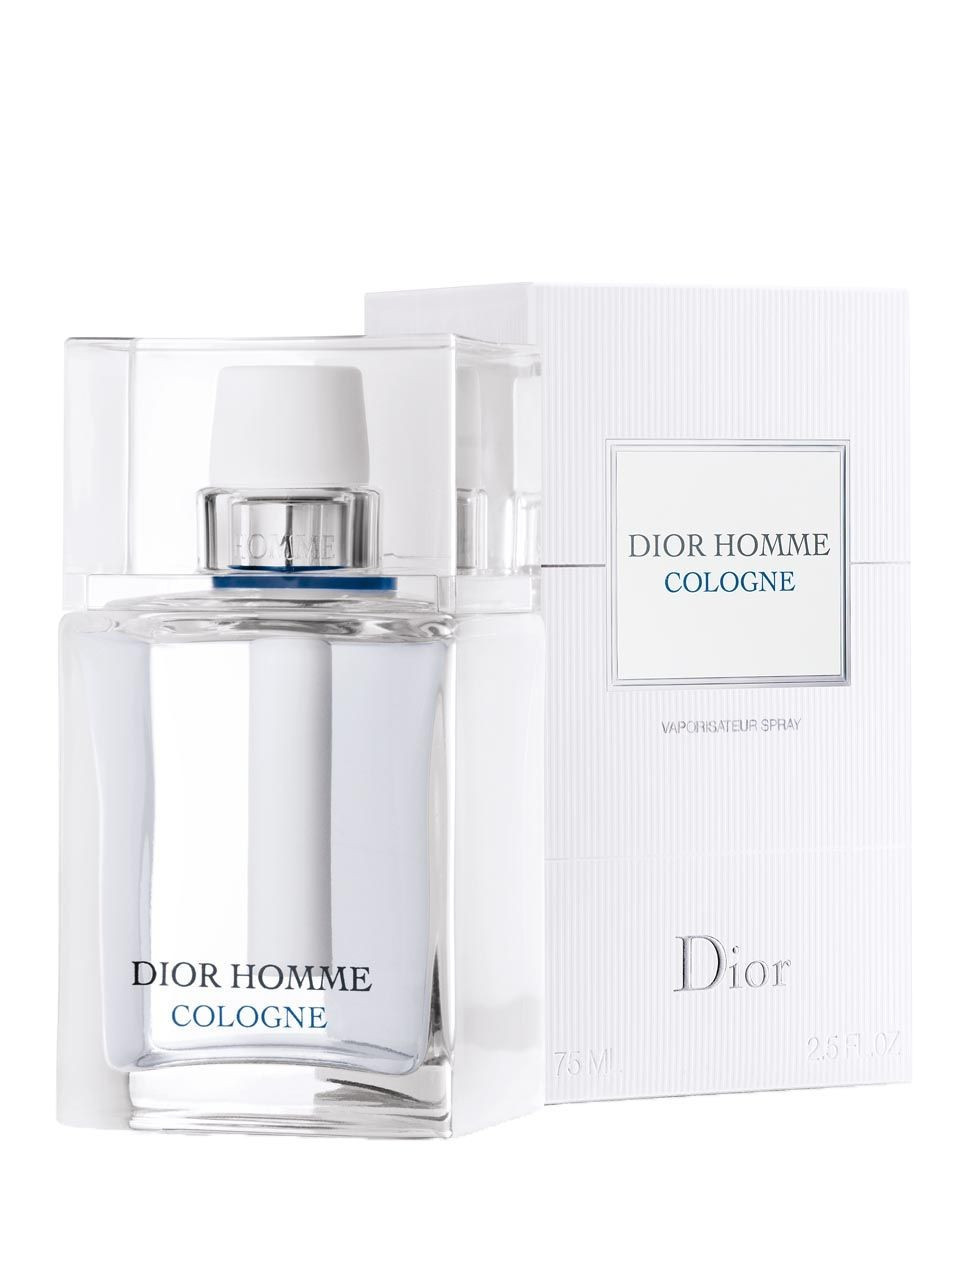 Christian Dior "Dior Homme Cologne" реплика - фото 1 - id-p41831536